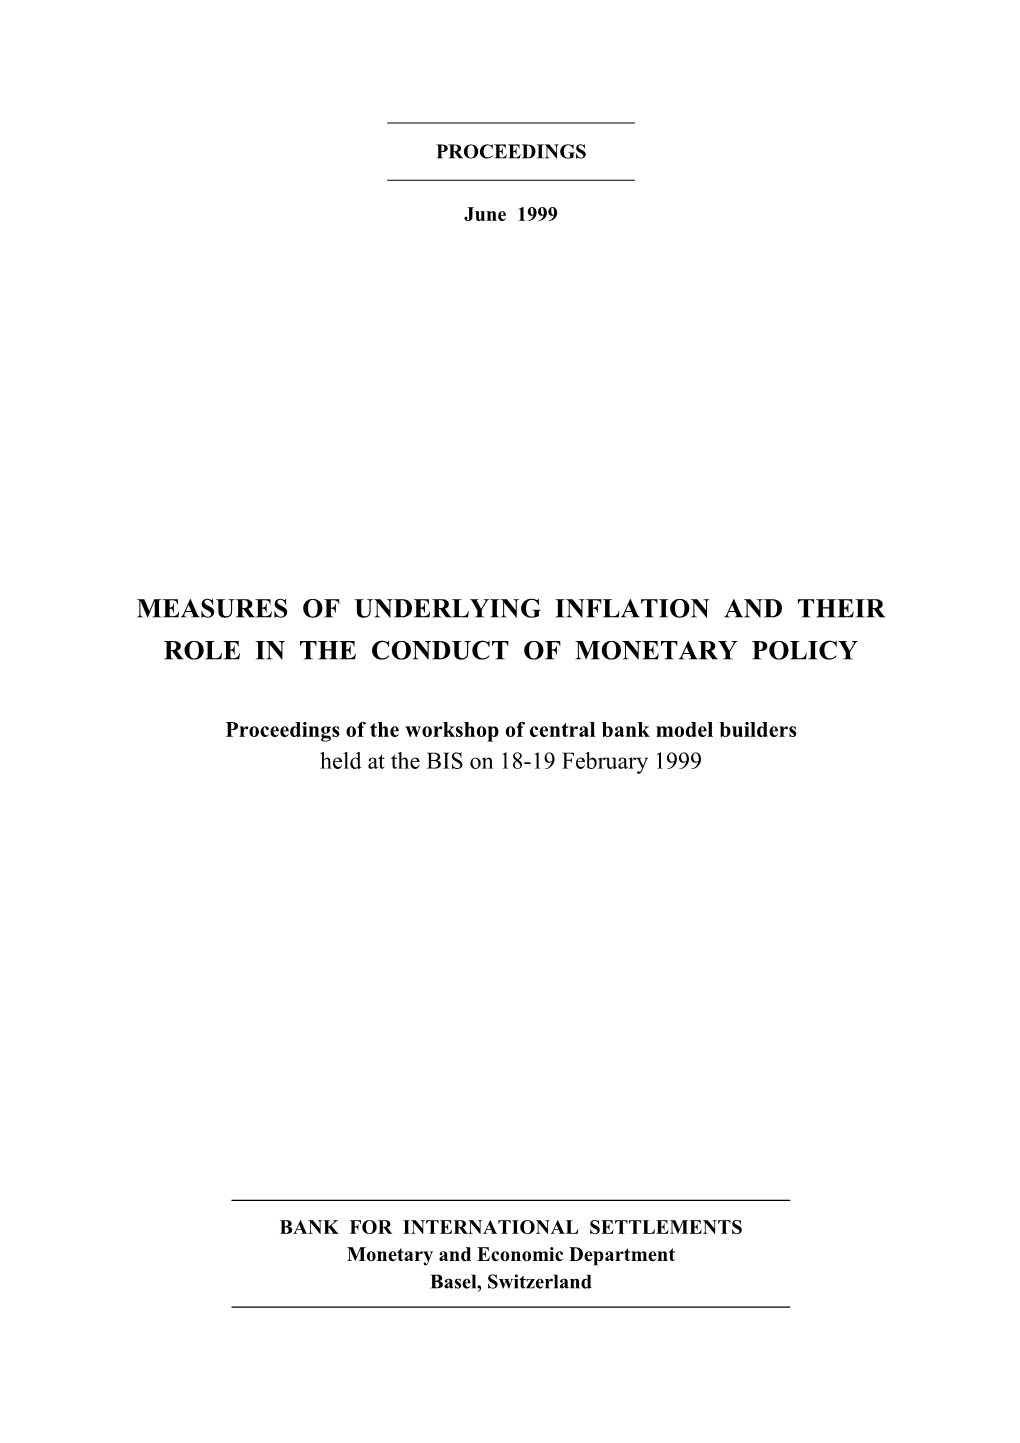 Measures of Underlying Inflation and Their Role in the Conduct of Monetary Policy